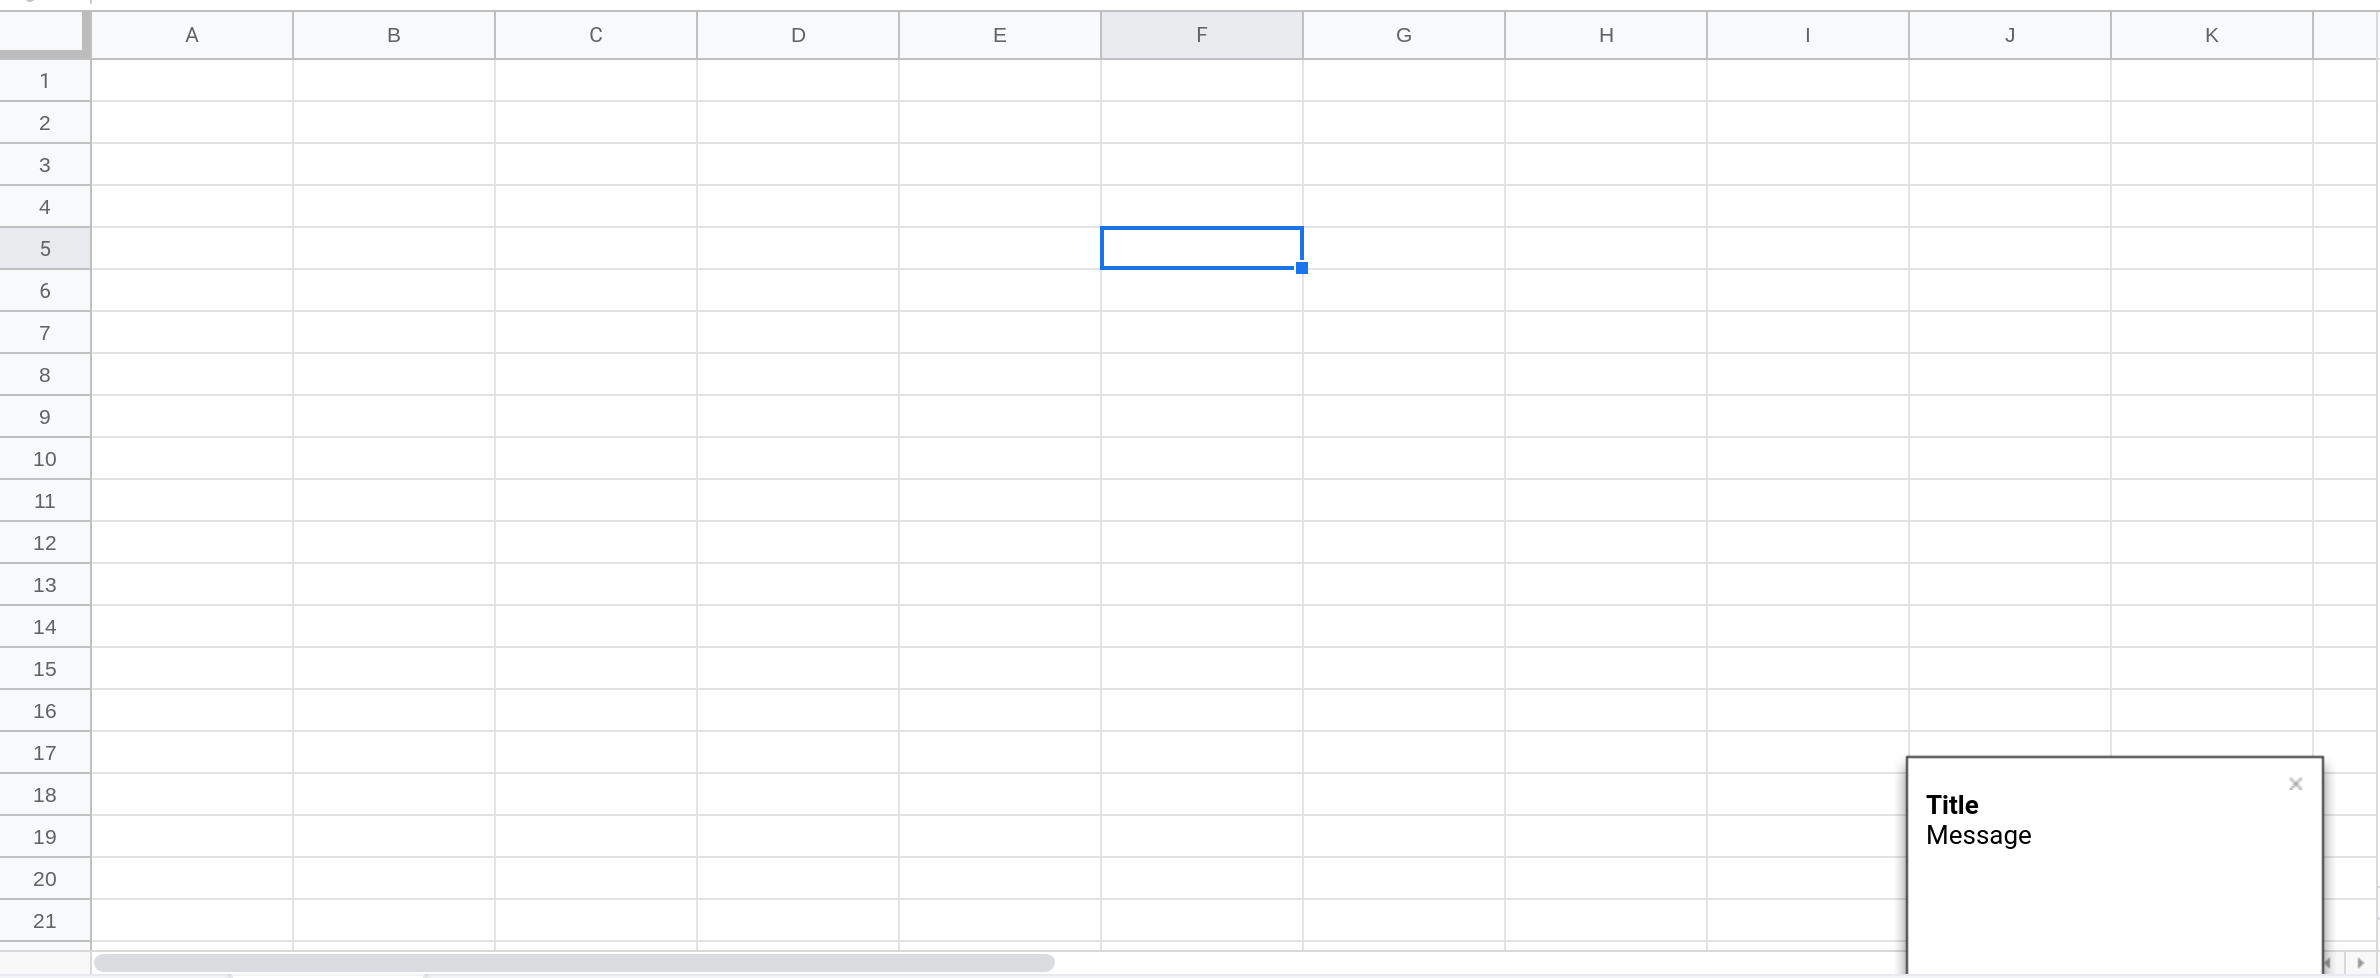 A screenshot of Google Sheets showing a toast notification in the lower right corner.